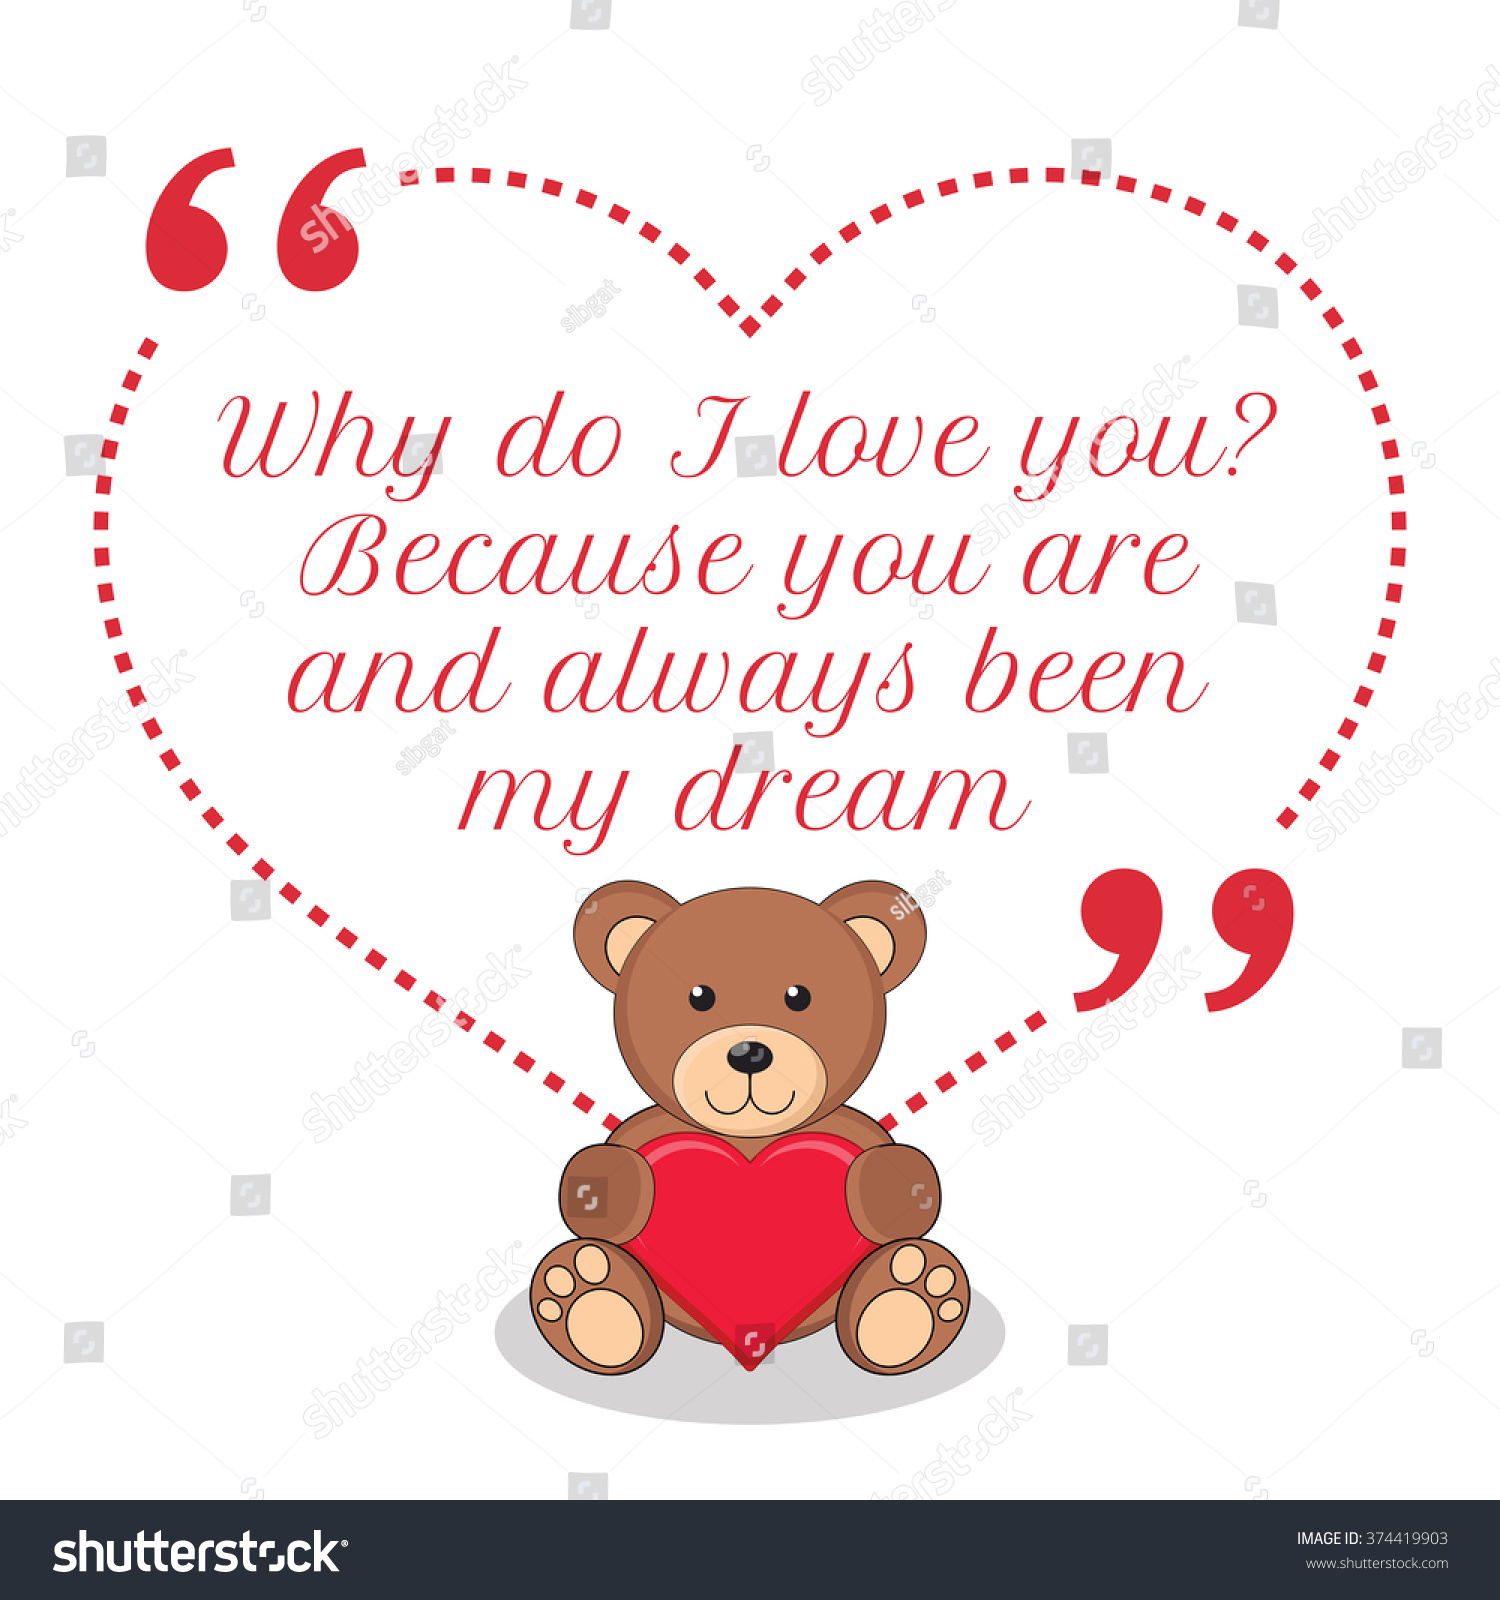 Inspirational love quote Why do I love you Because you are and always been